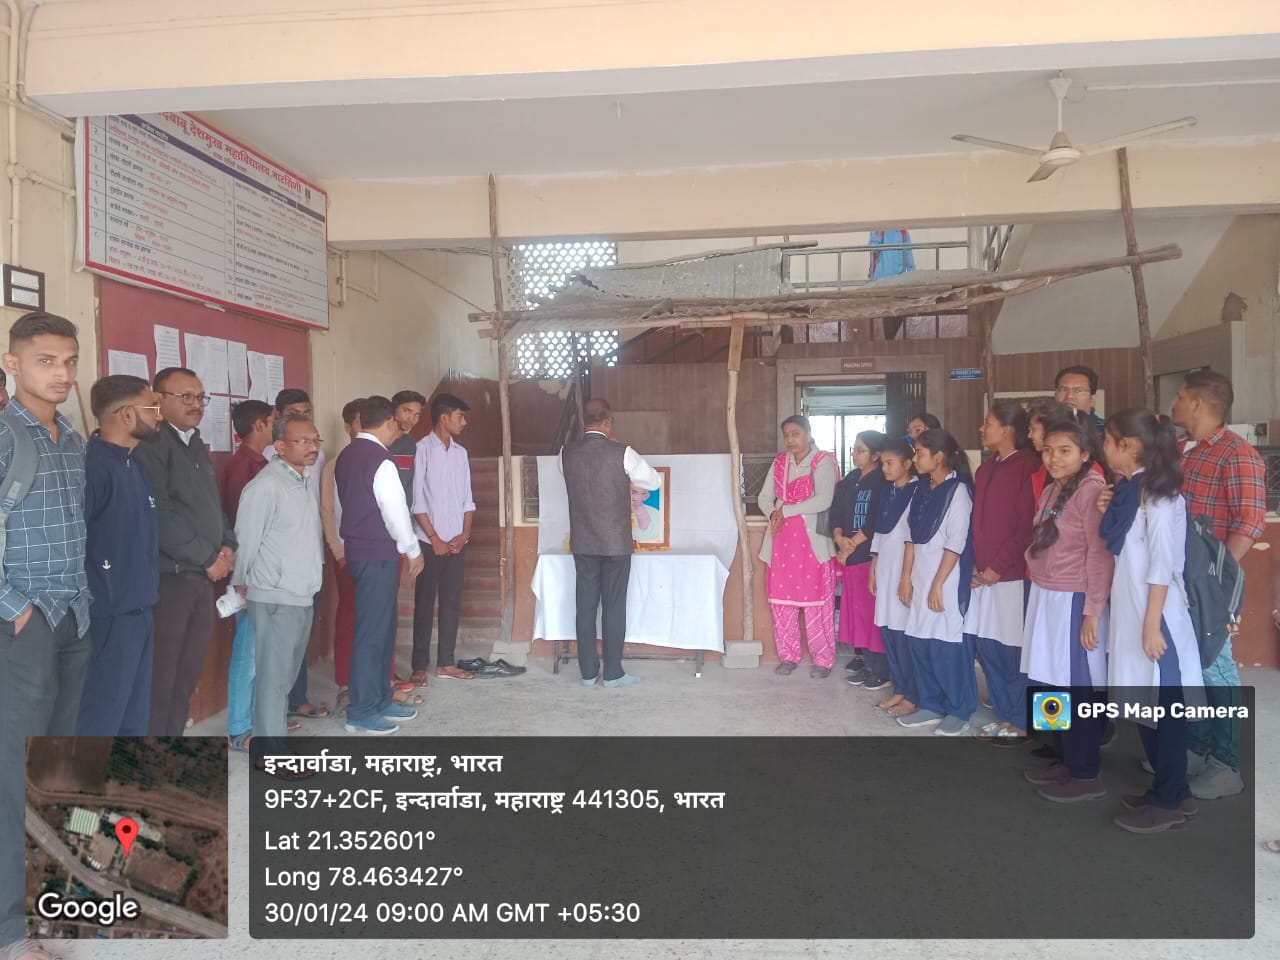 <h1>The staff members and students of college remembering Mahatma Gandhi on his death anniversary. Dr. Prakash Pawar, Principal of college paid floral tribute to Mahatma Gandhi image&nbsp;on his death anniversary, 30th January 2024.</h1>
